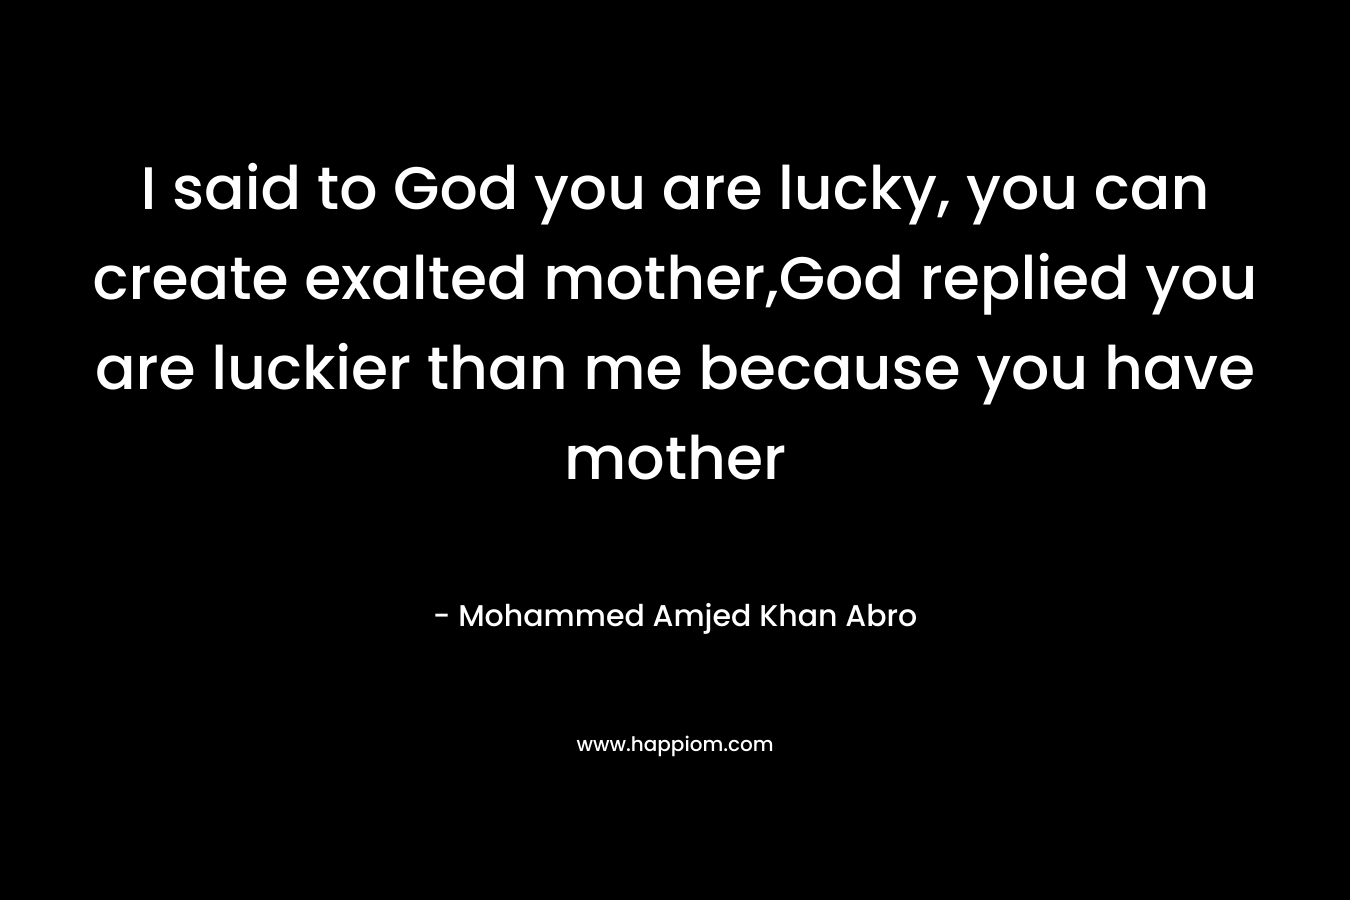 I said to God you are lucky, you can create exalted mother,God replied you are luckier than me because you have mother – Mohammed Amjed Khan Abro